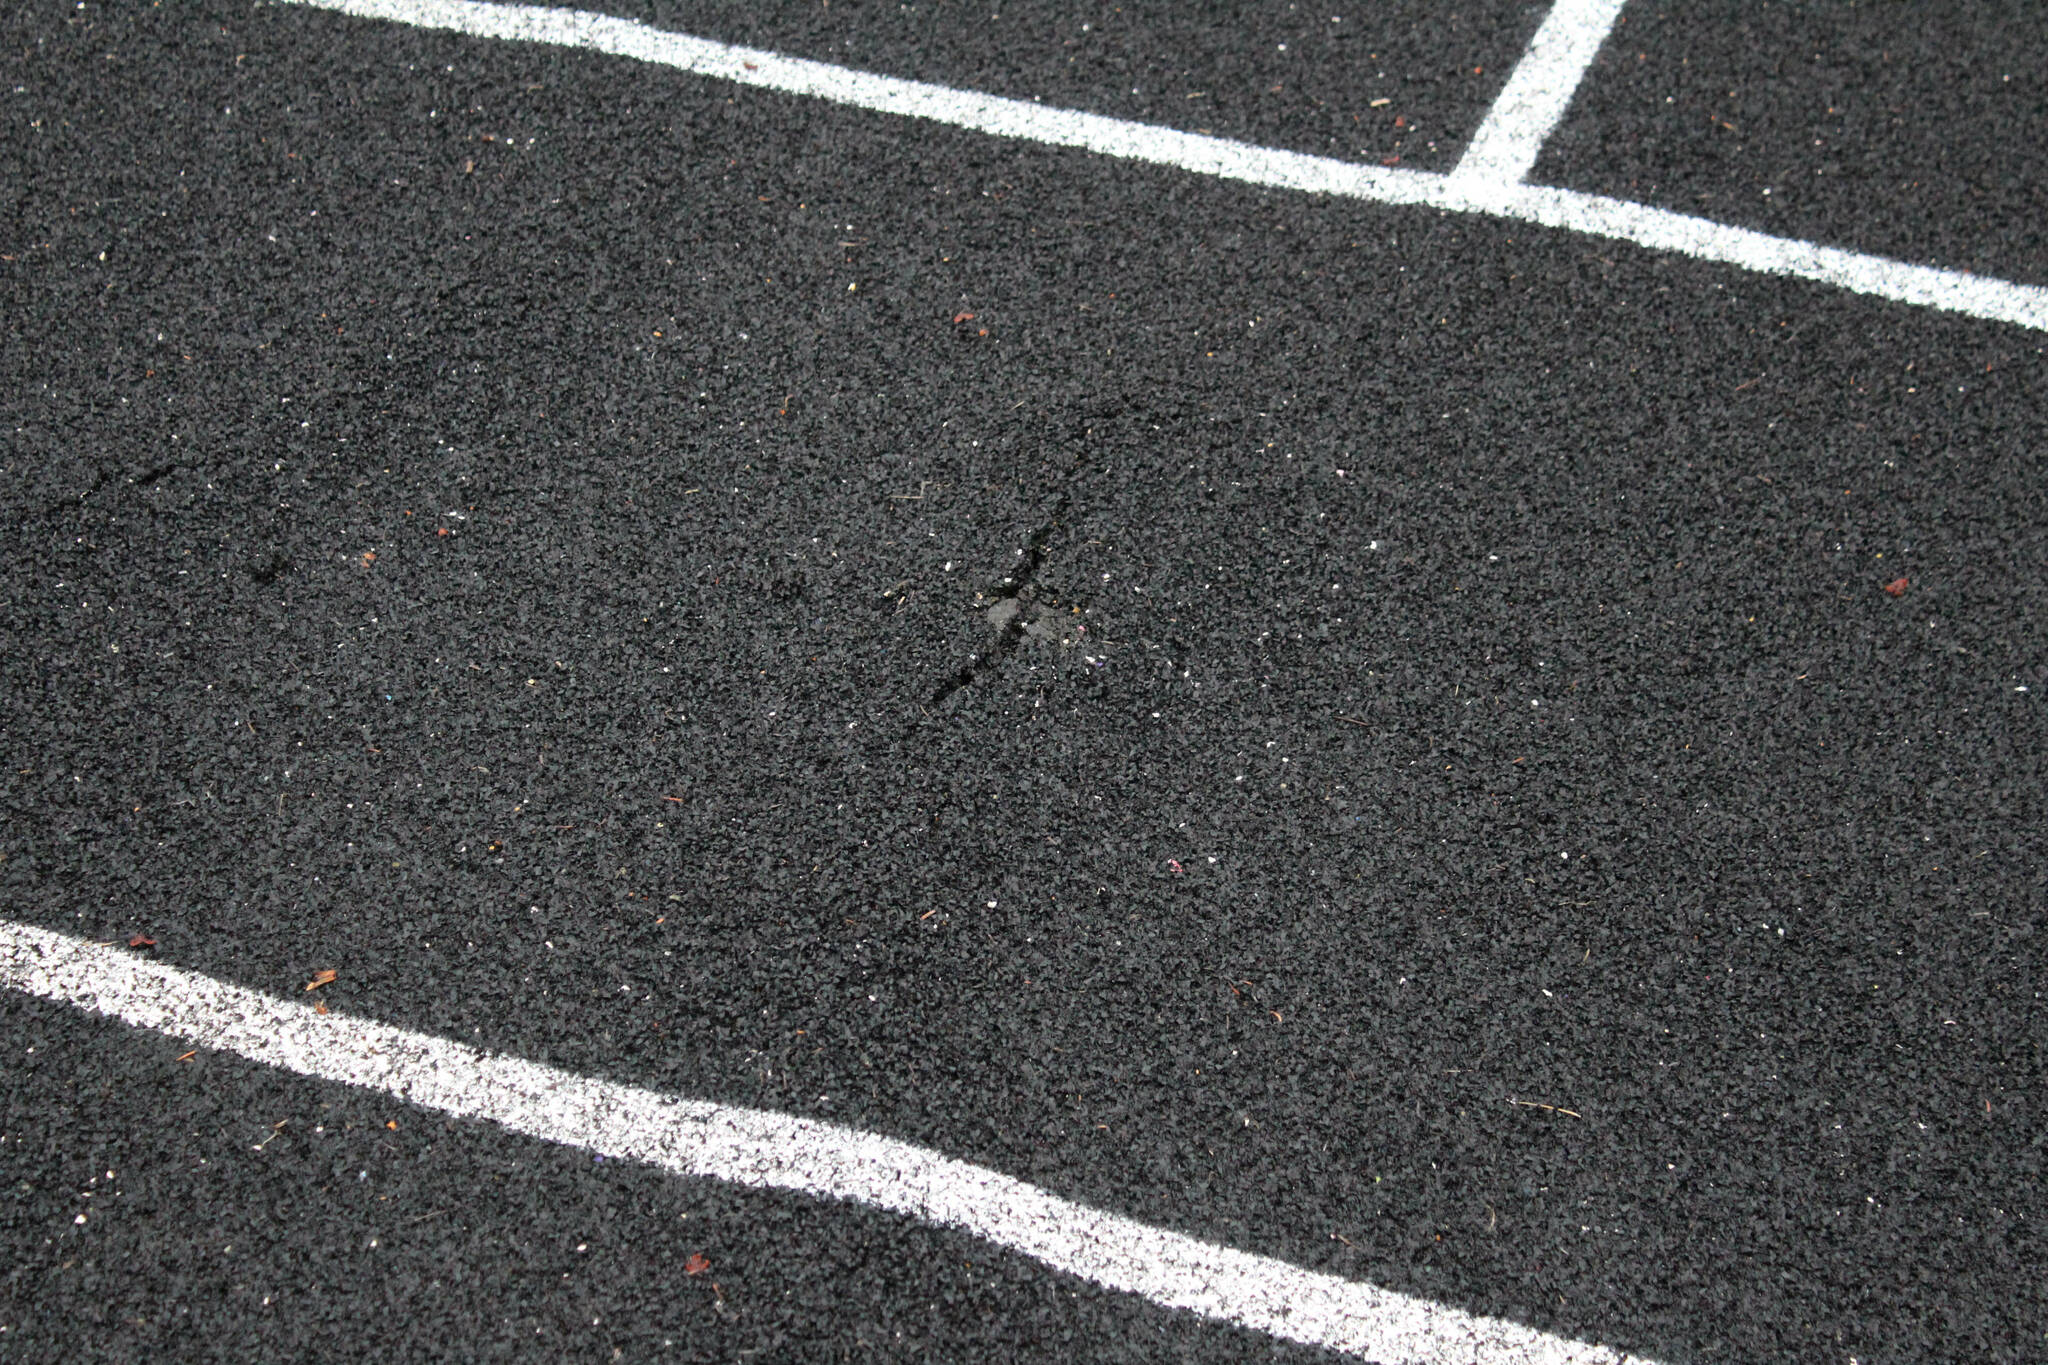 A crack warps the track at Nikiski Middle/High School on Monday, Sept. 19, 2022, in Nikiski, Alaska. The track is one of several projects in a bond package Kenai Peninsula voters will consider during the Oct. 4 municipal election next month. (Ashlyn O’Hara/Peninsula Clarion)